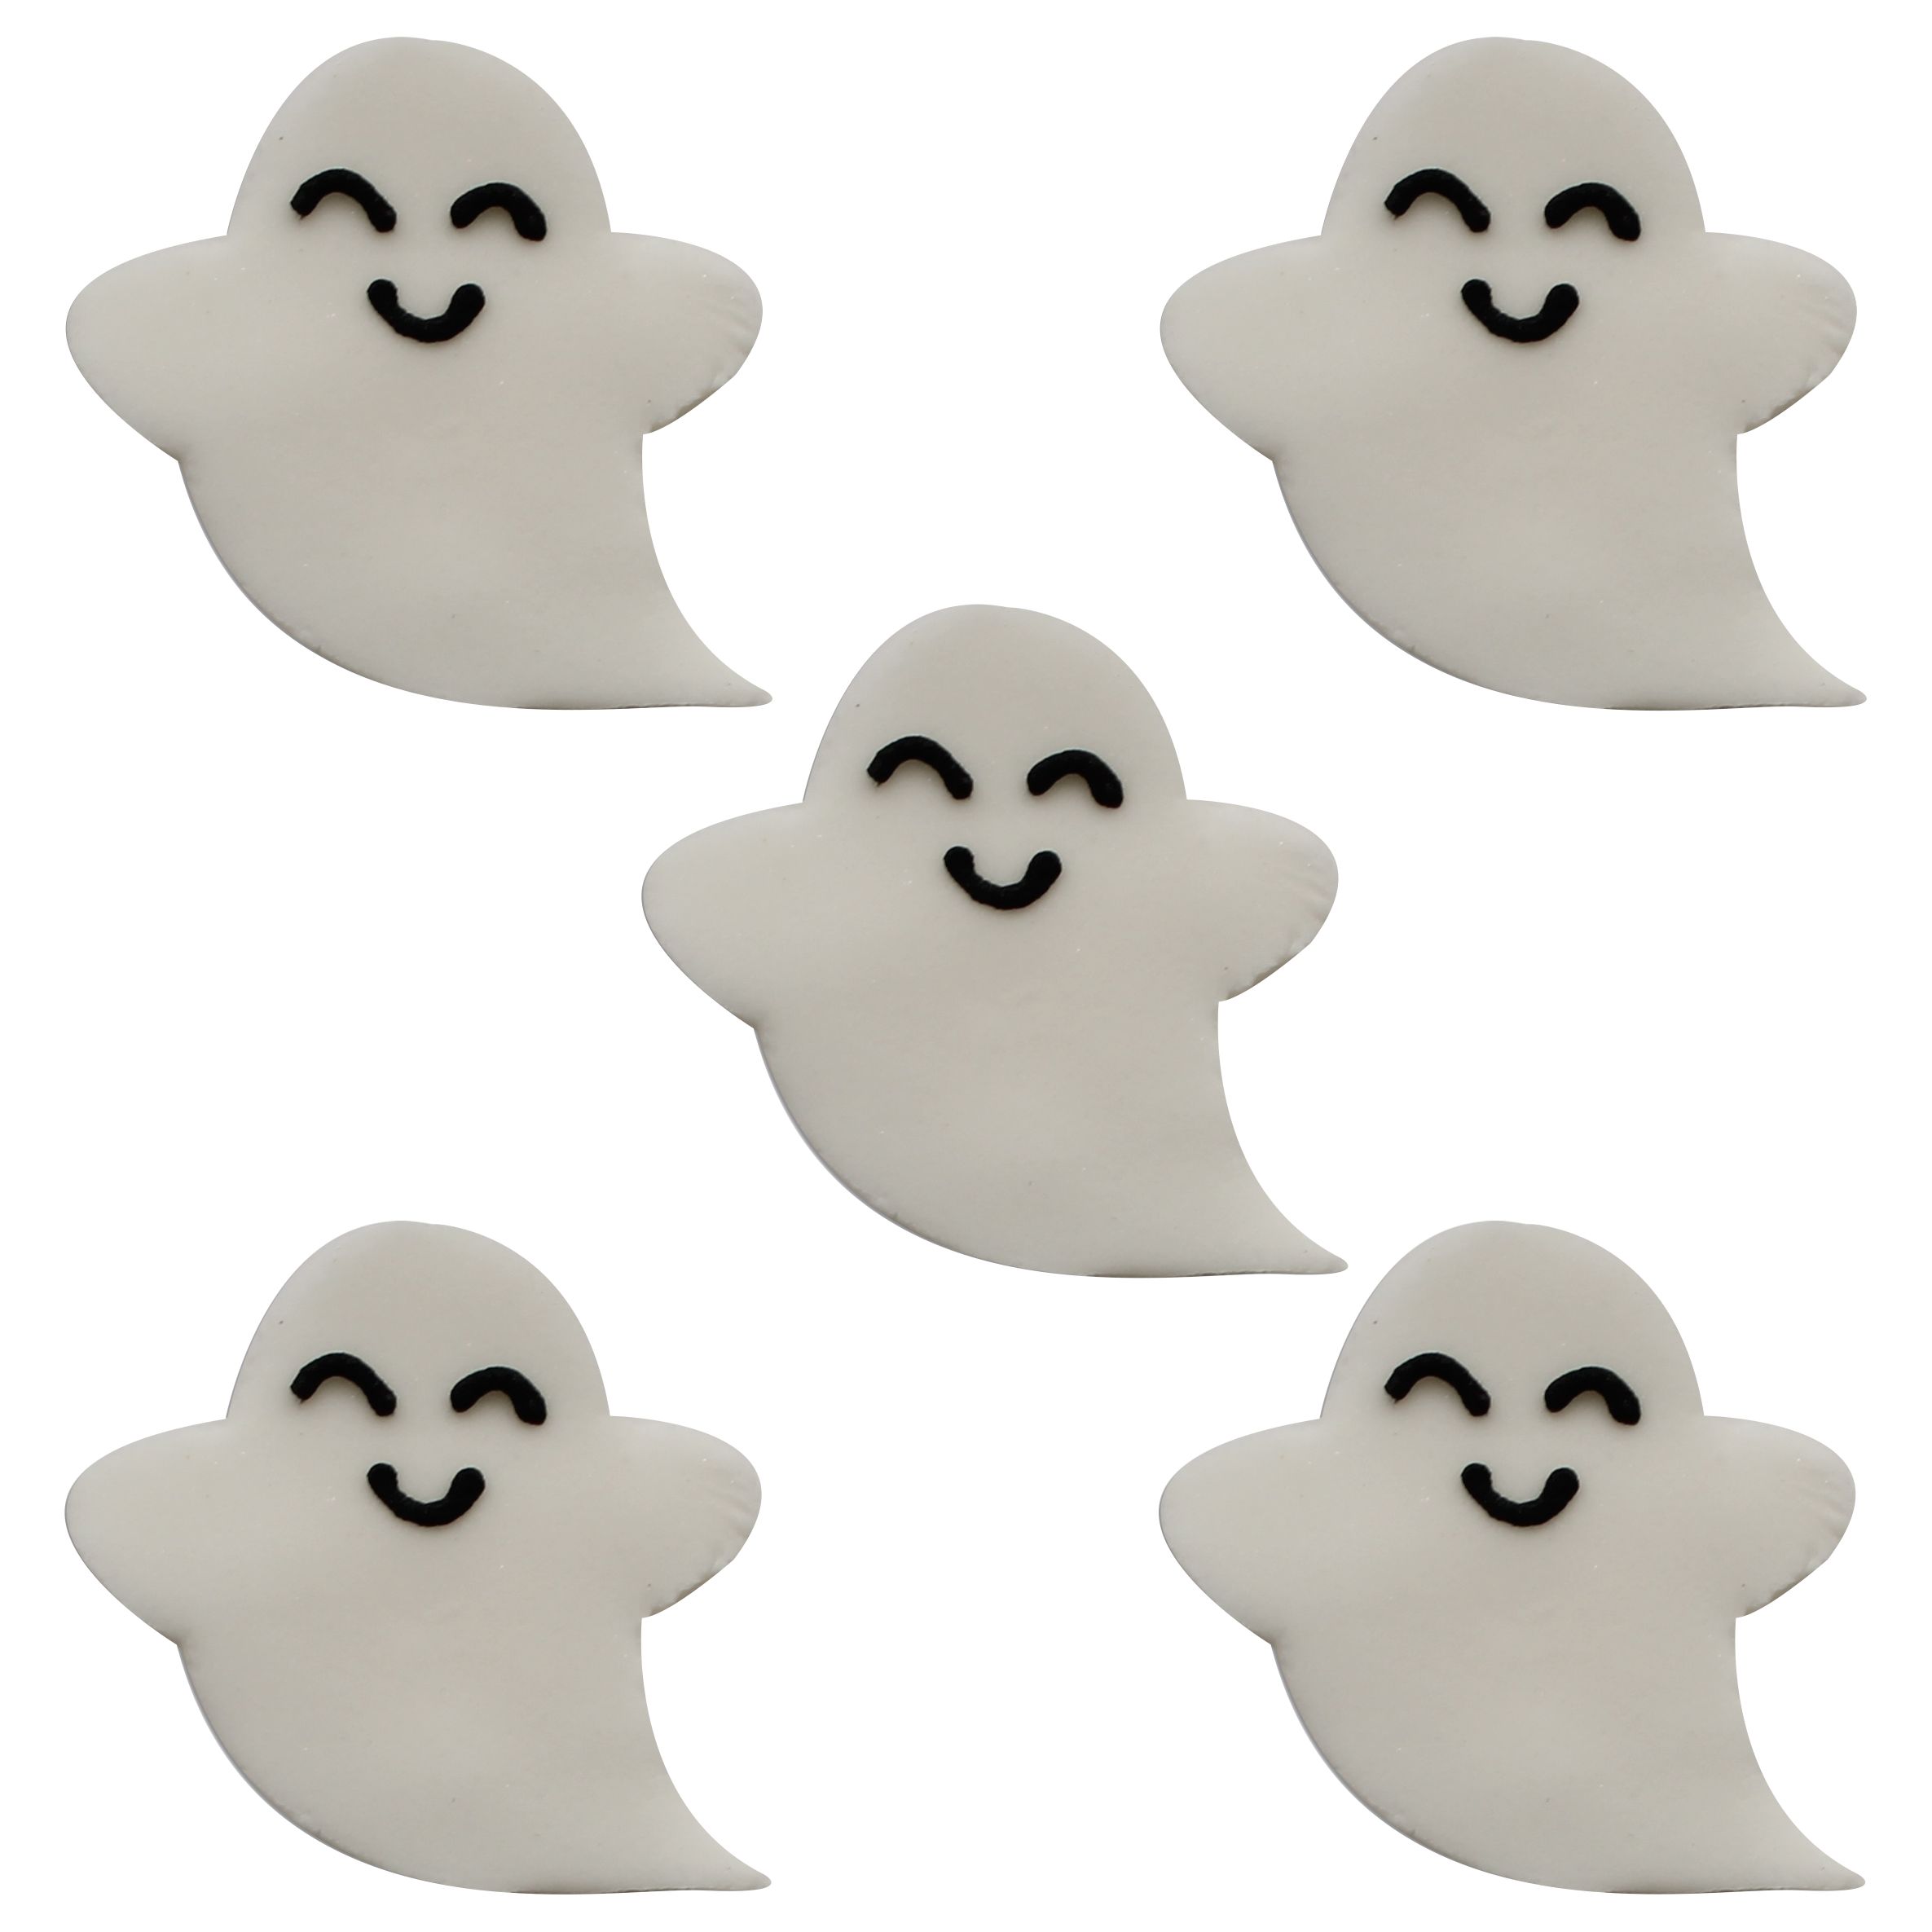 Creative Party Sugarcraft Halloween Ghost Cake Toppers, Pack of 5